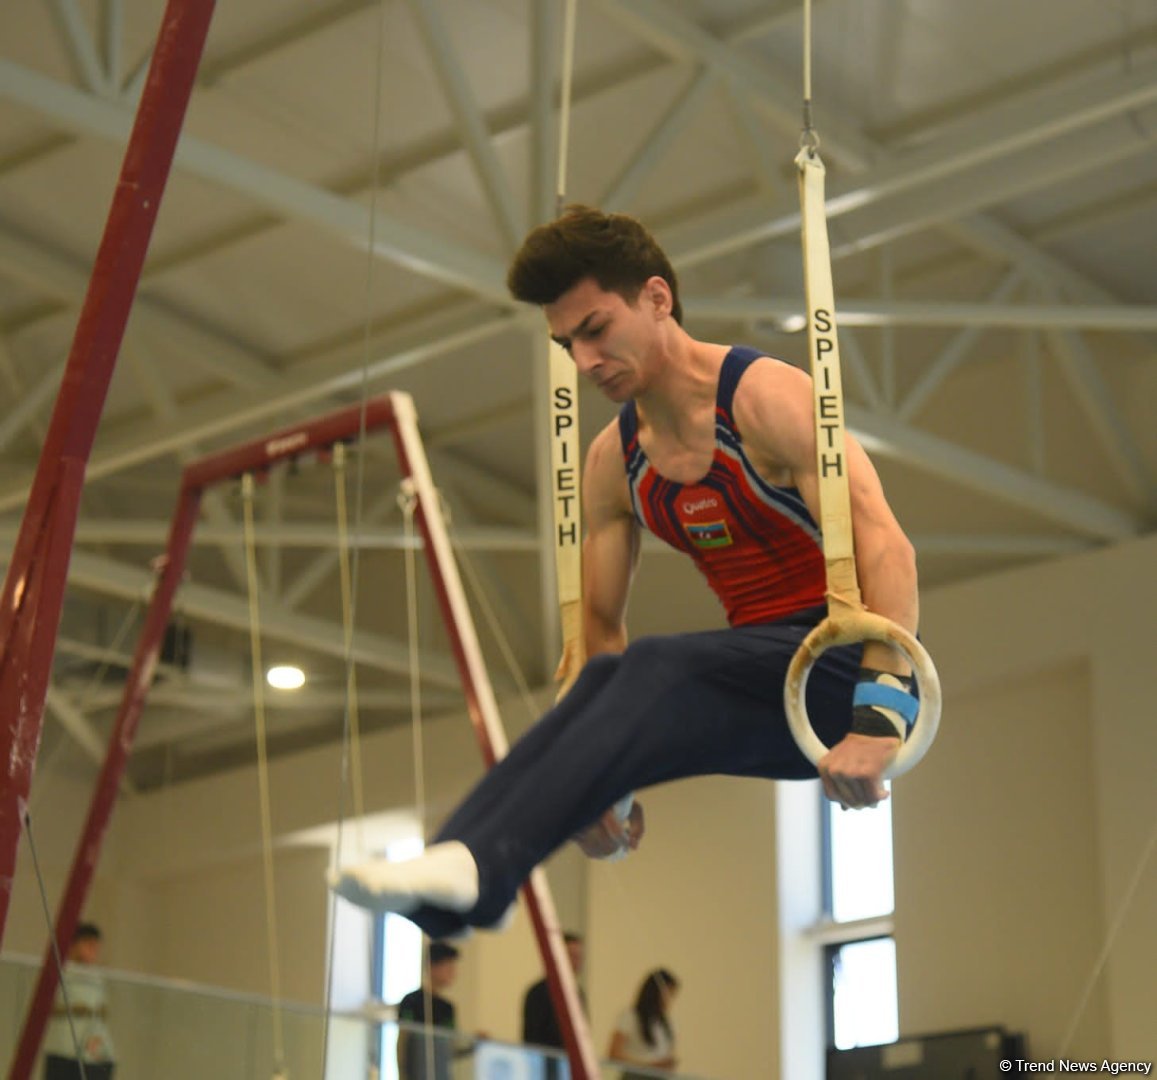 Competitions of Open Baku Championships in Artistic Gymnastics kick off (PHOTO)